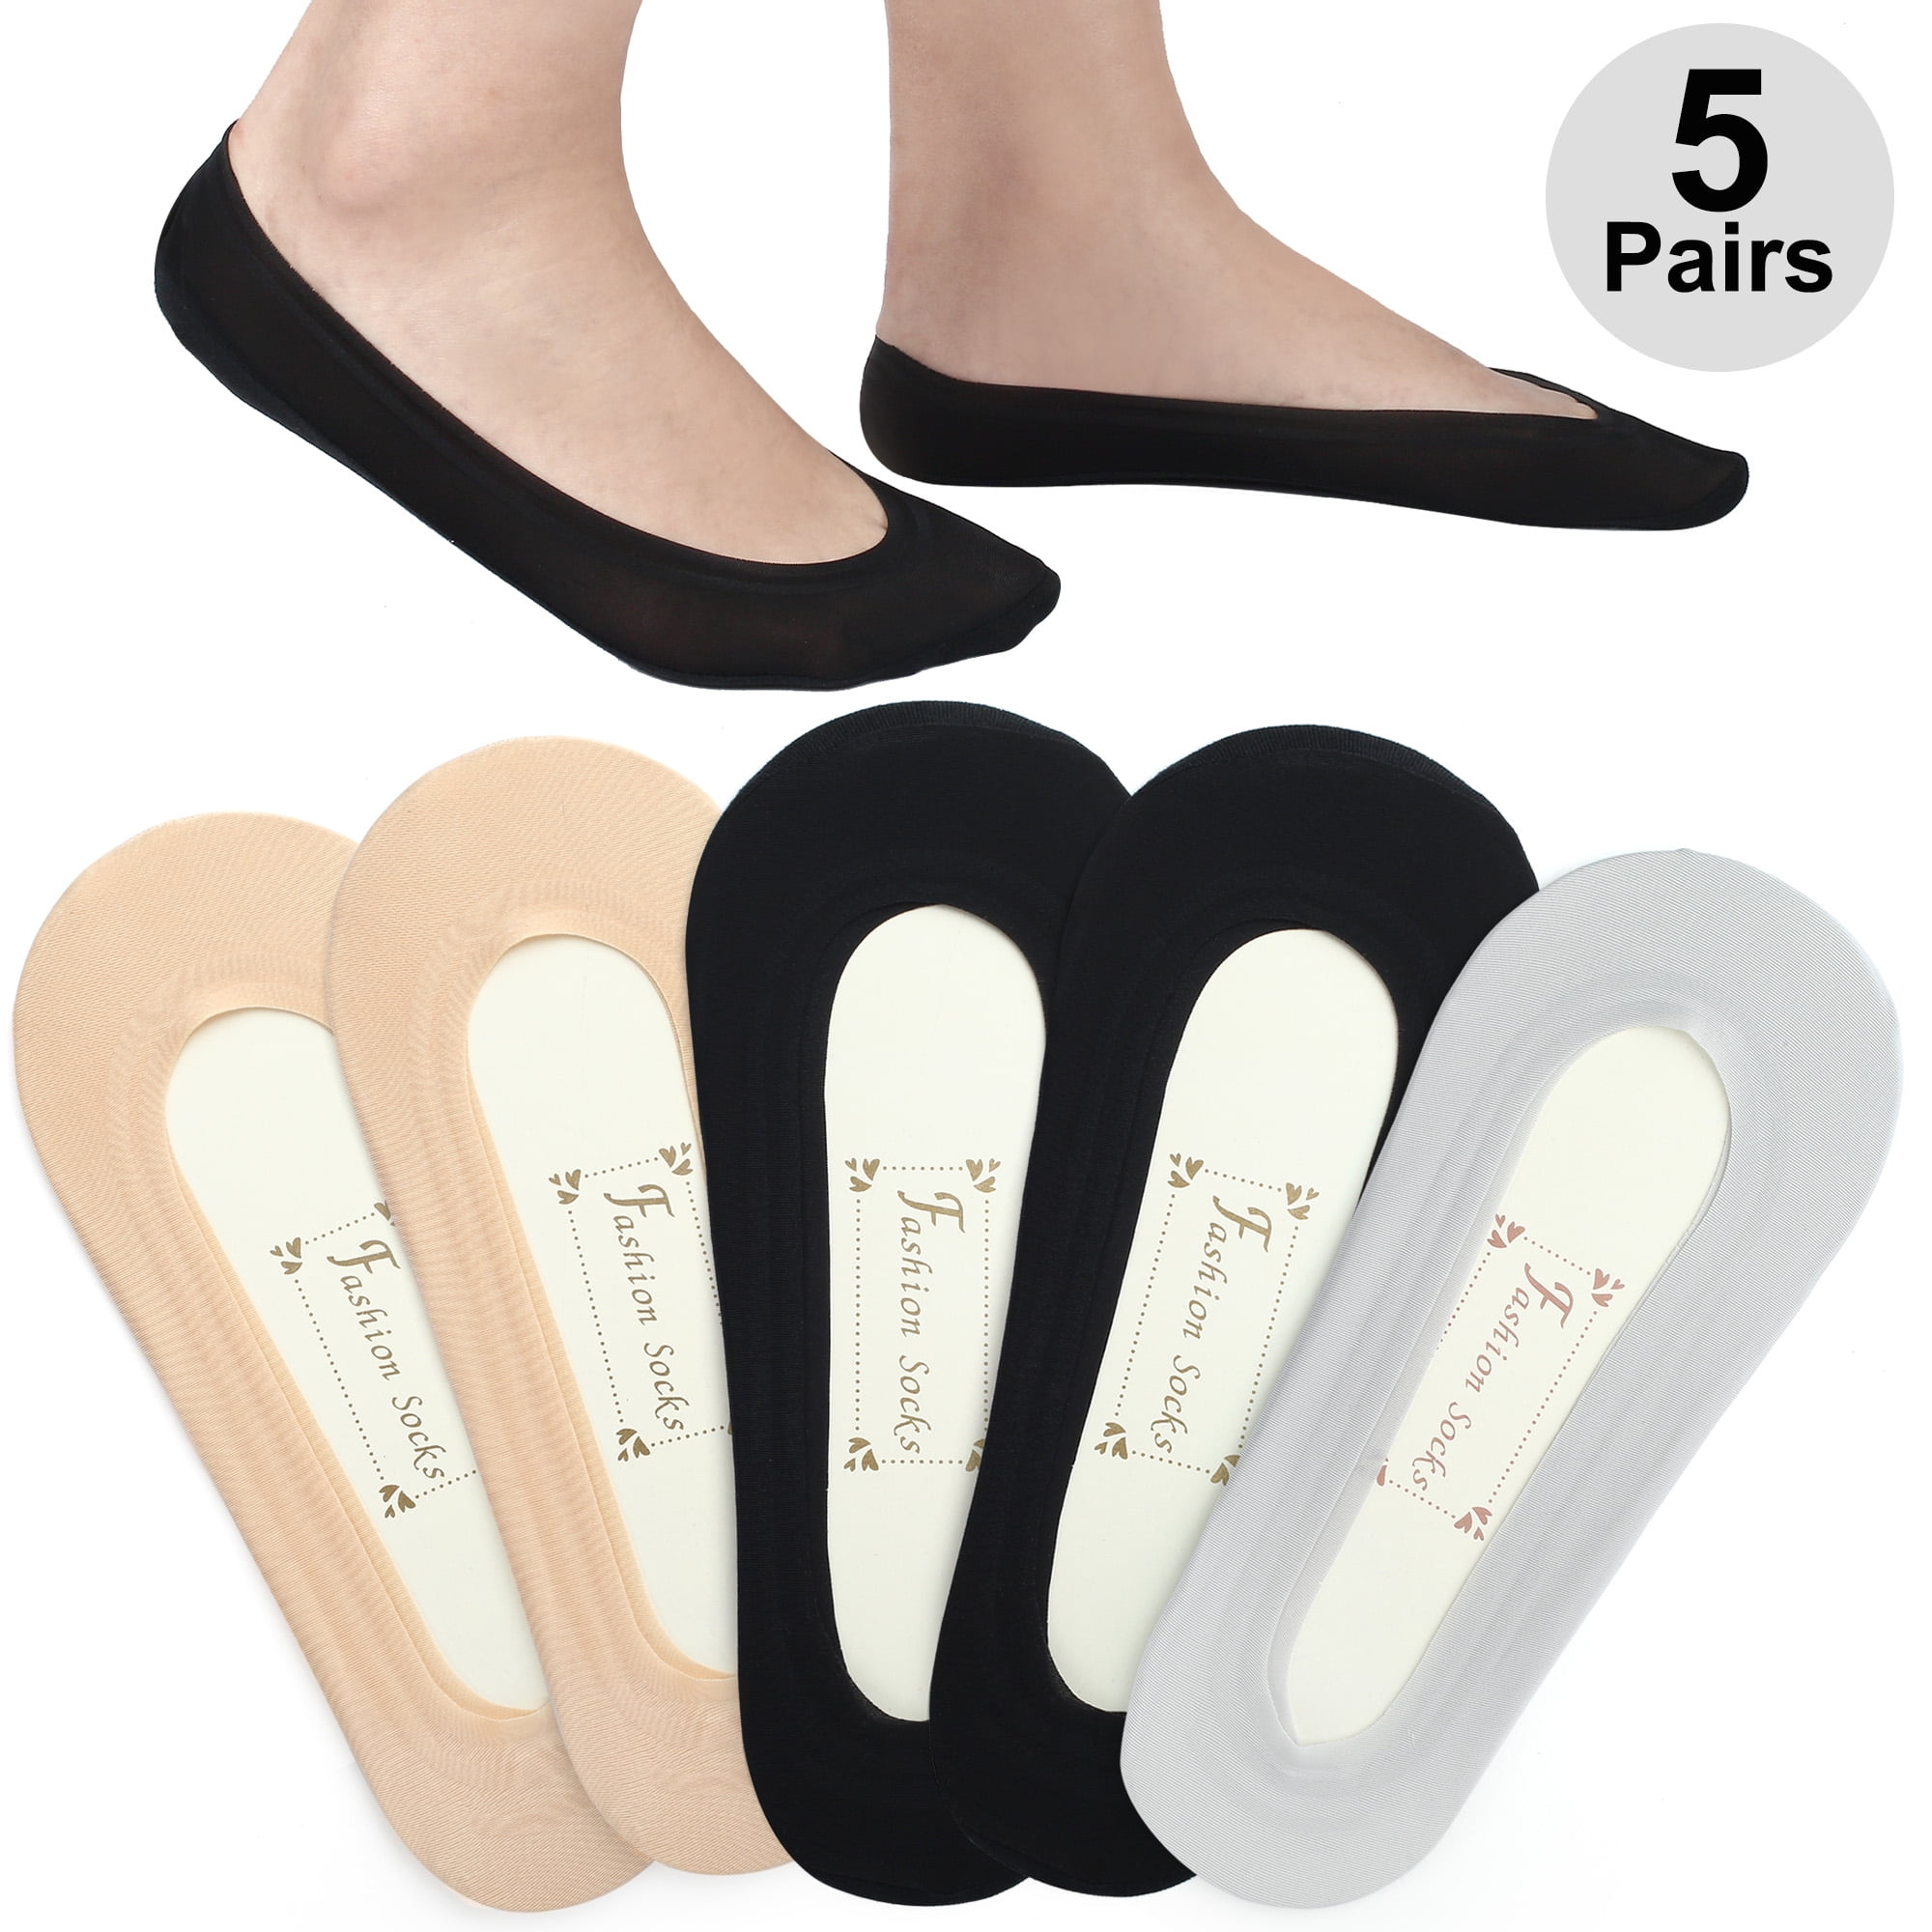 6 Pairs Women No Show Socks Ultra Low Cut Liner Socks Non Slip Invisible Socks for Loafer Boat Flats 6 Pairs